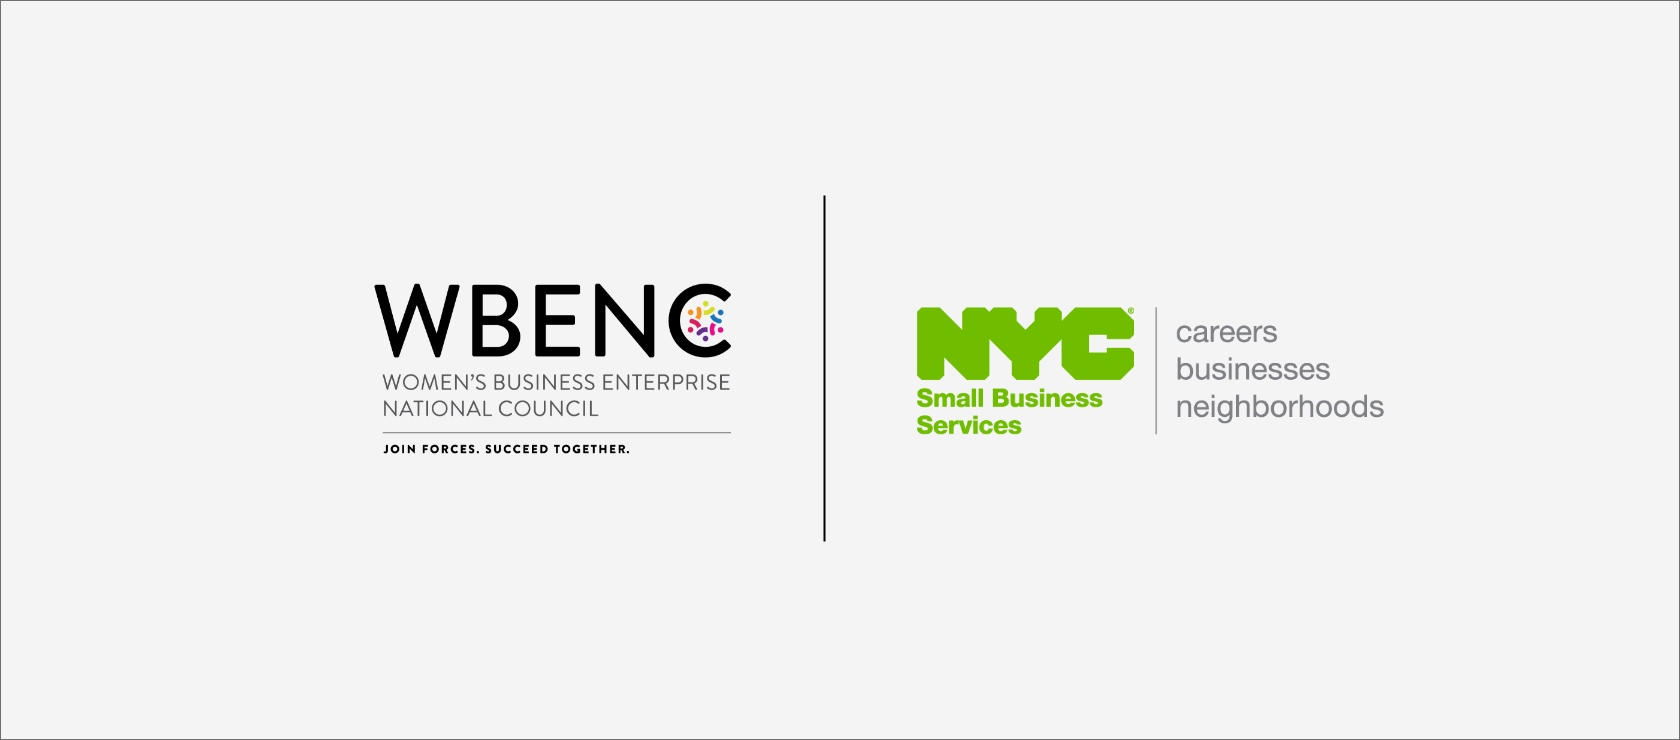 Women’ Business Enterprise National Council (WBENC) logo and NYC Small Business Services logo.